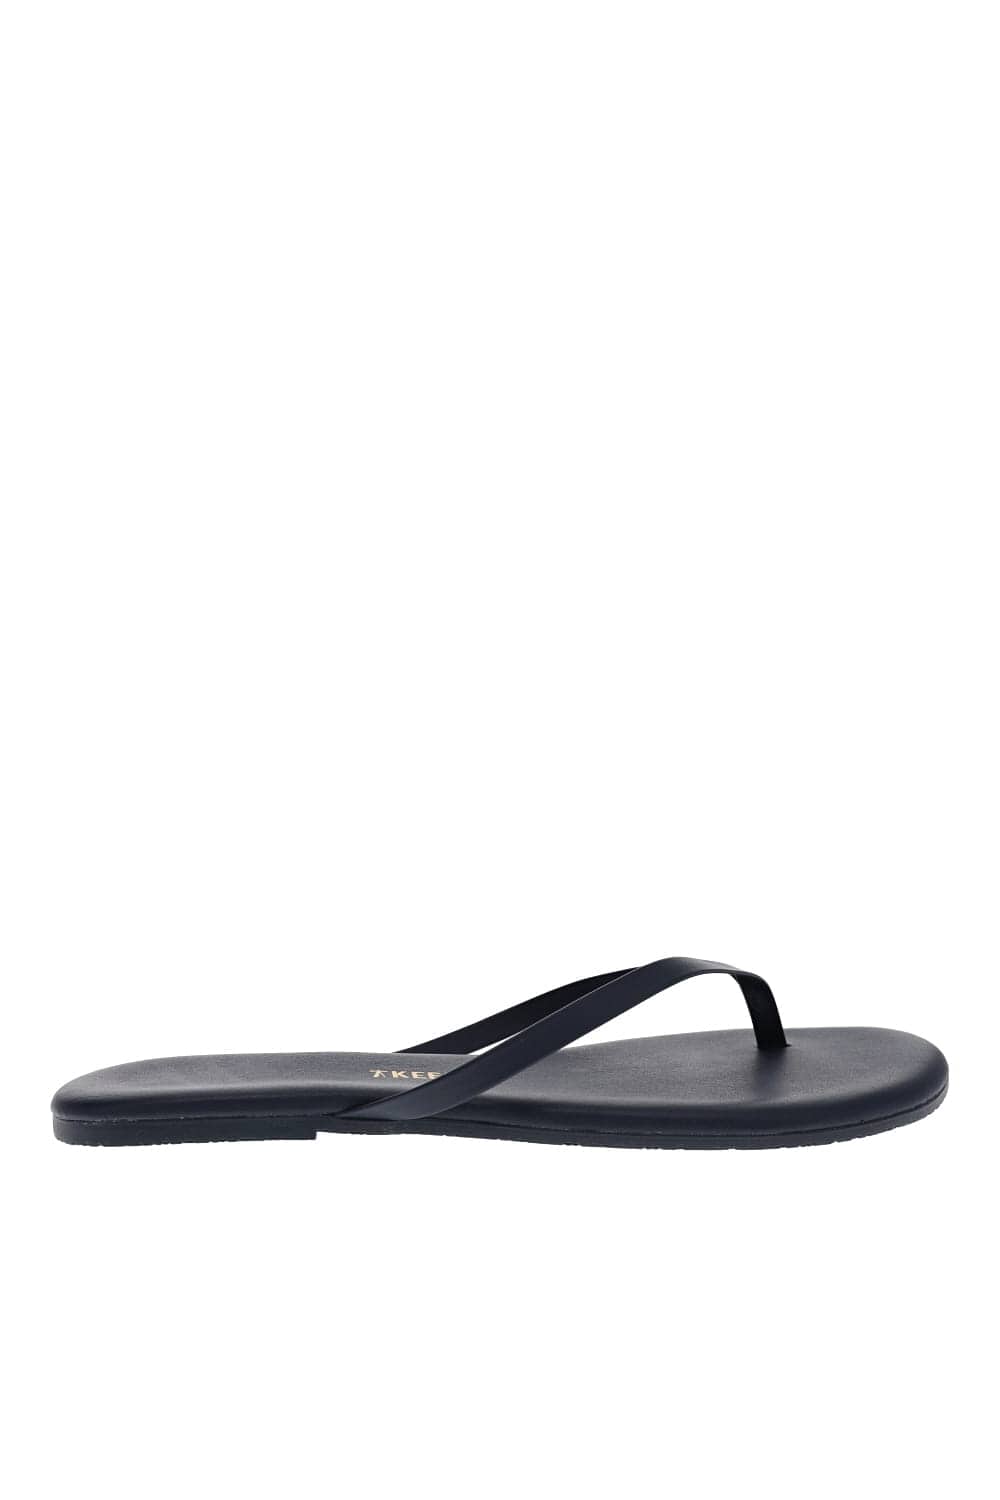 TKEES Solids No.38 Navy Leather Sandal